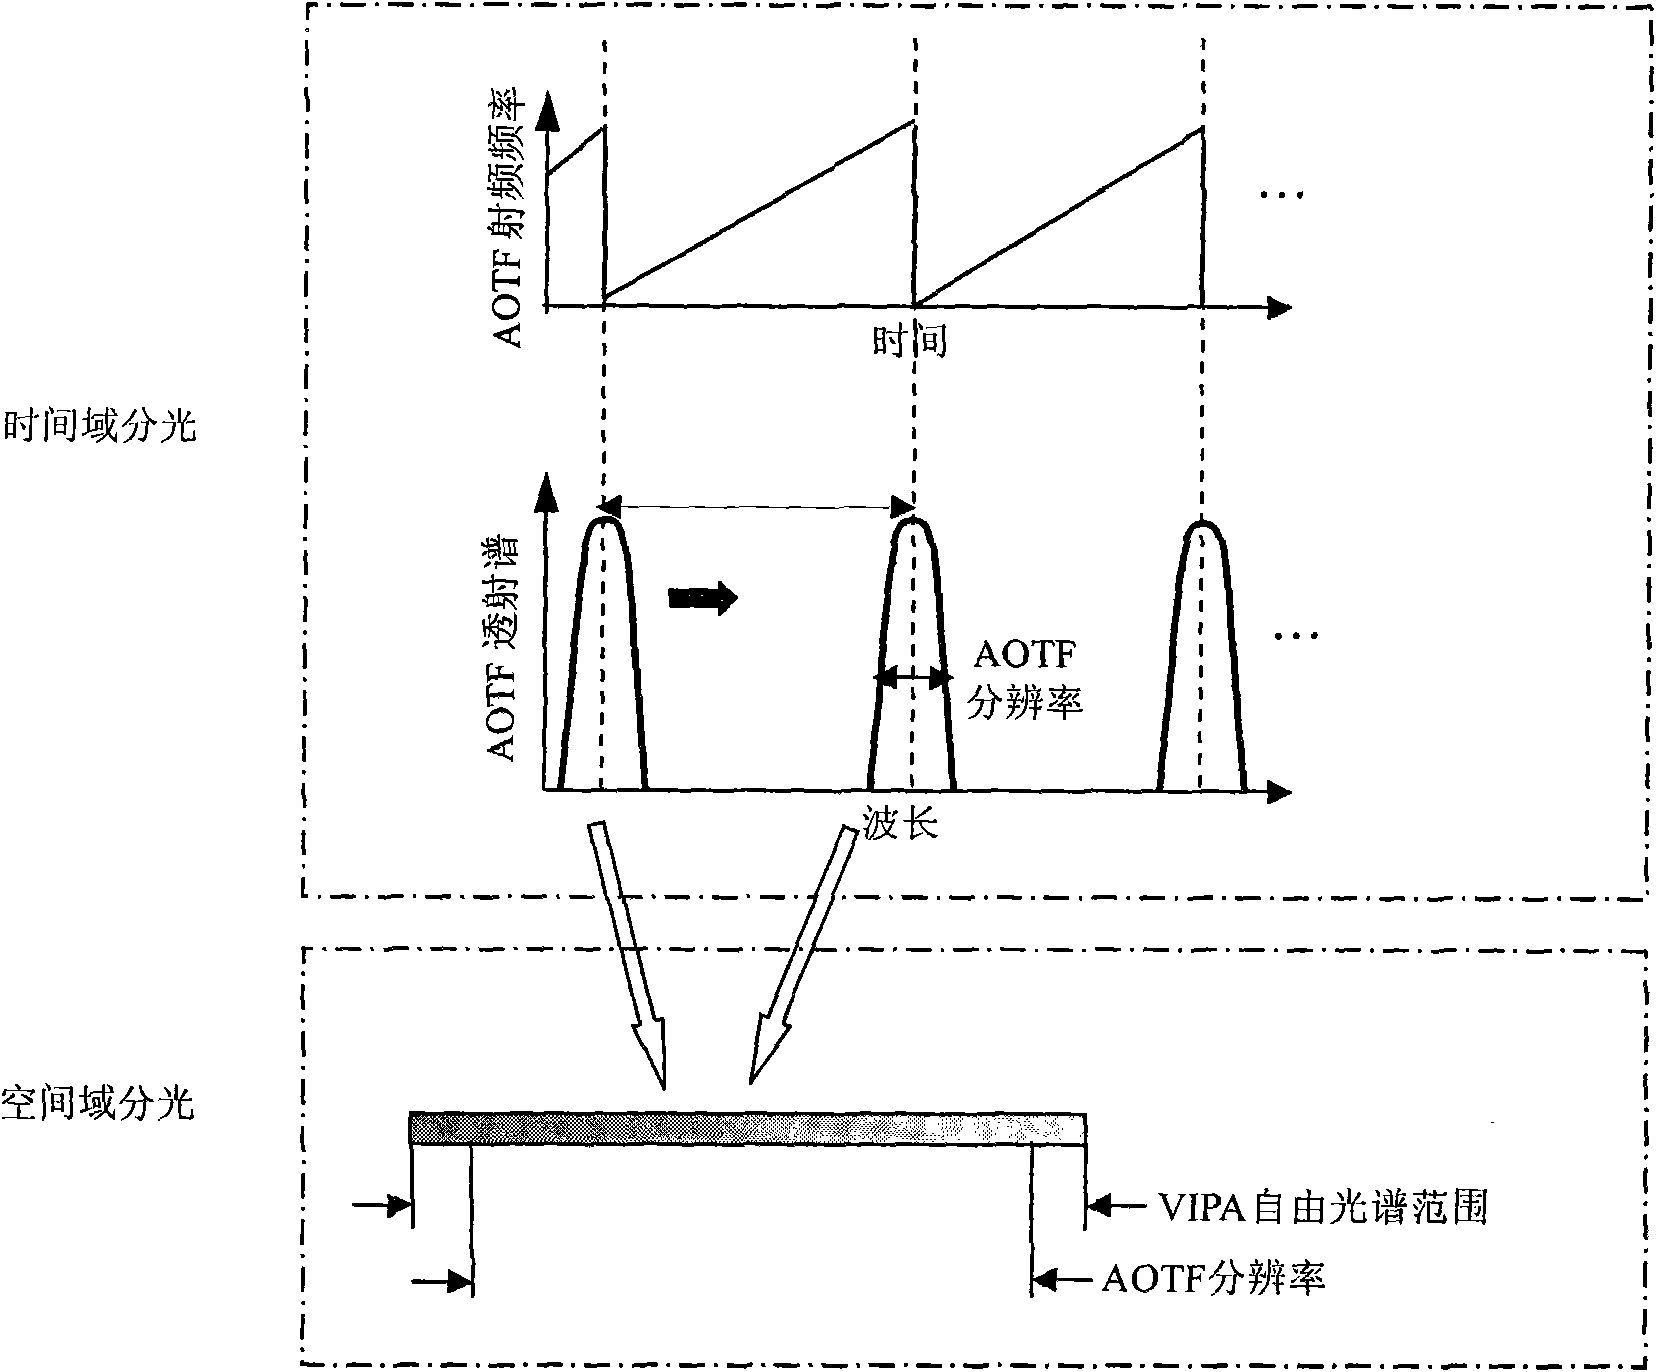 Method and system for wide-spectrum and high-resolution detection based on space-time light splitting in OCT